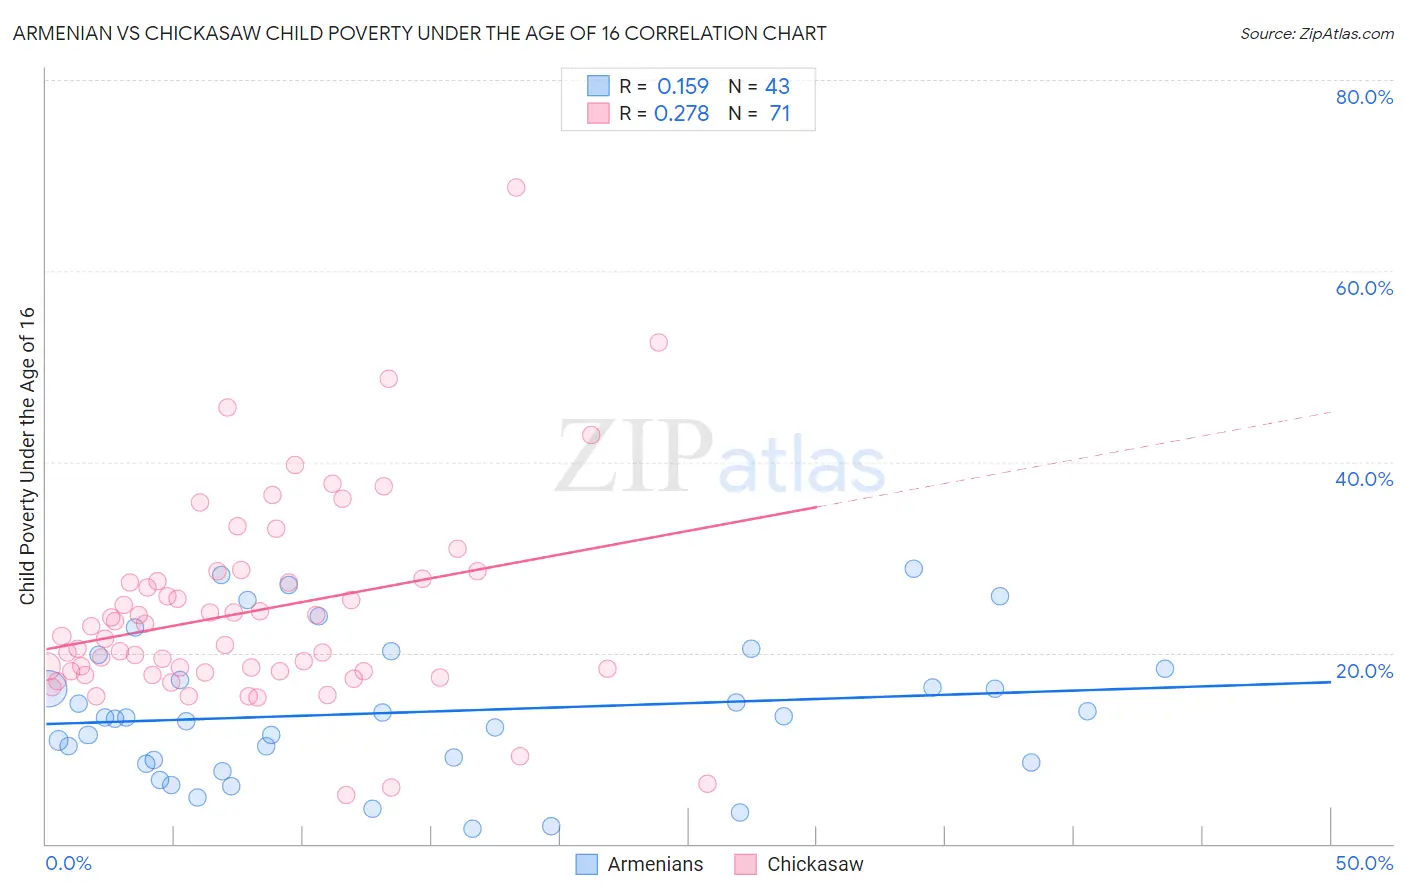 Armenian vs Chickasaw Child Poverty Under the Age of 16